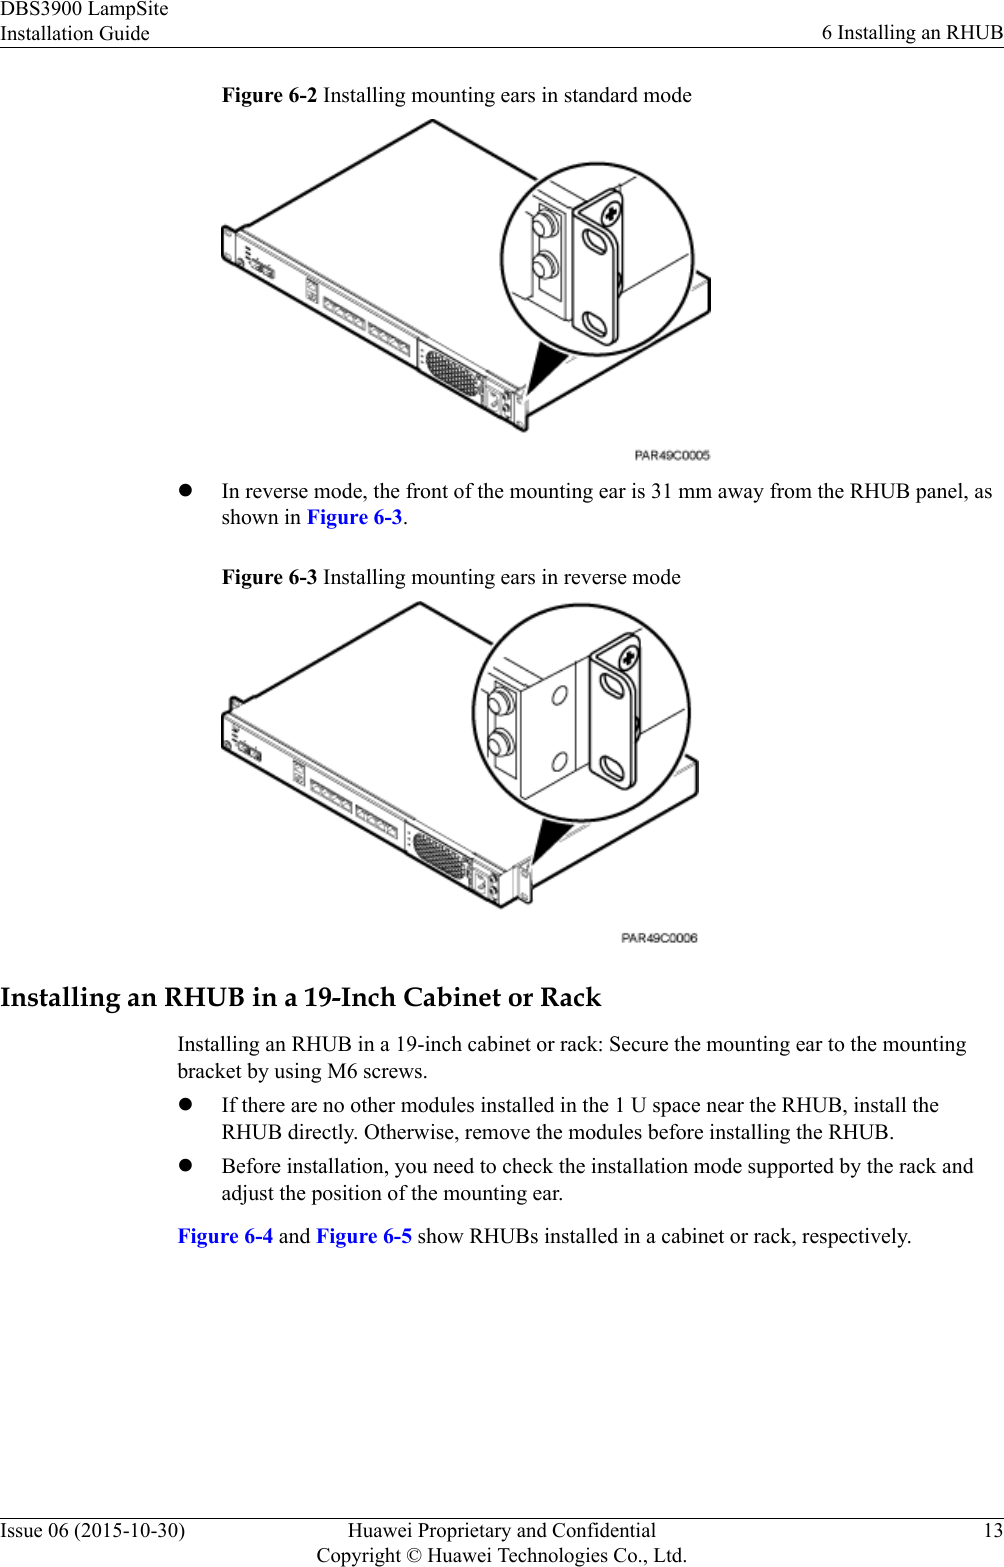 Figure 6-2 Installing mounting ears in standard modelIn reverse mode, the front of the mounting ear is 31 mm away from the RHUB panel, asshown in Figure 6-3.Figure 6-3 Installing mounting ears in reverse modeInstalling an RHUB in a 19-Inch Cabinet or RackInstalling an RHUB in a 19-inch cabinet or rack: Secure the mounting ear to the mountingbracket by using M6 screws.lIf there are no other modules installed in the 1 U space near the RHUB, install theRHUB directly. Otherwise, remove the modules before installing the RHUB.lBefore installation, you need to check the installation mode supported by the rack andadjust the position of the mounting ear.Figure 6-4 and Figure 6-5 show RHUBs installed in a cabinet or rack, respectively.DBS3900 LampSiteInstallation Guide 6 Installing an RHUBIssue 06 (2015-10-30) Huawei Proprietary and ConfidentialCopyright © Huawei Technologies Co., Ltd.13